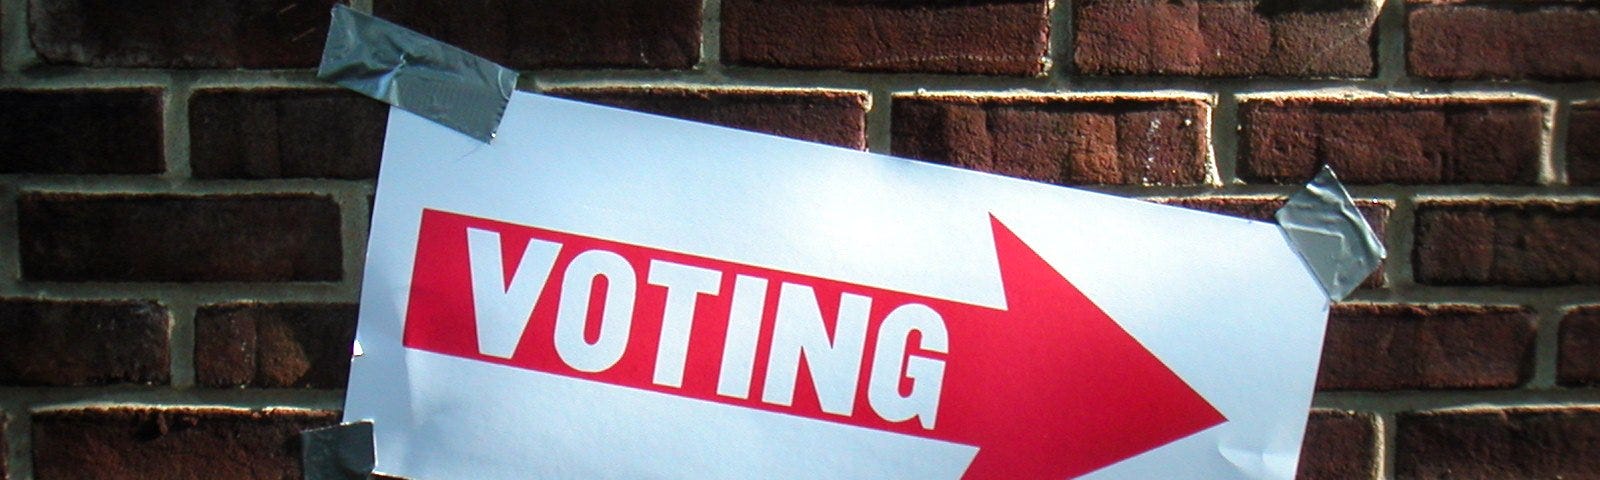 Voting sign taped to a wall. Courtesy Keith Ivey via flickr.